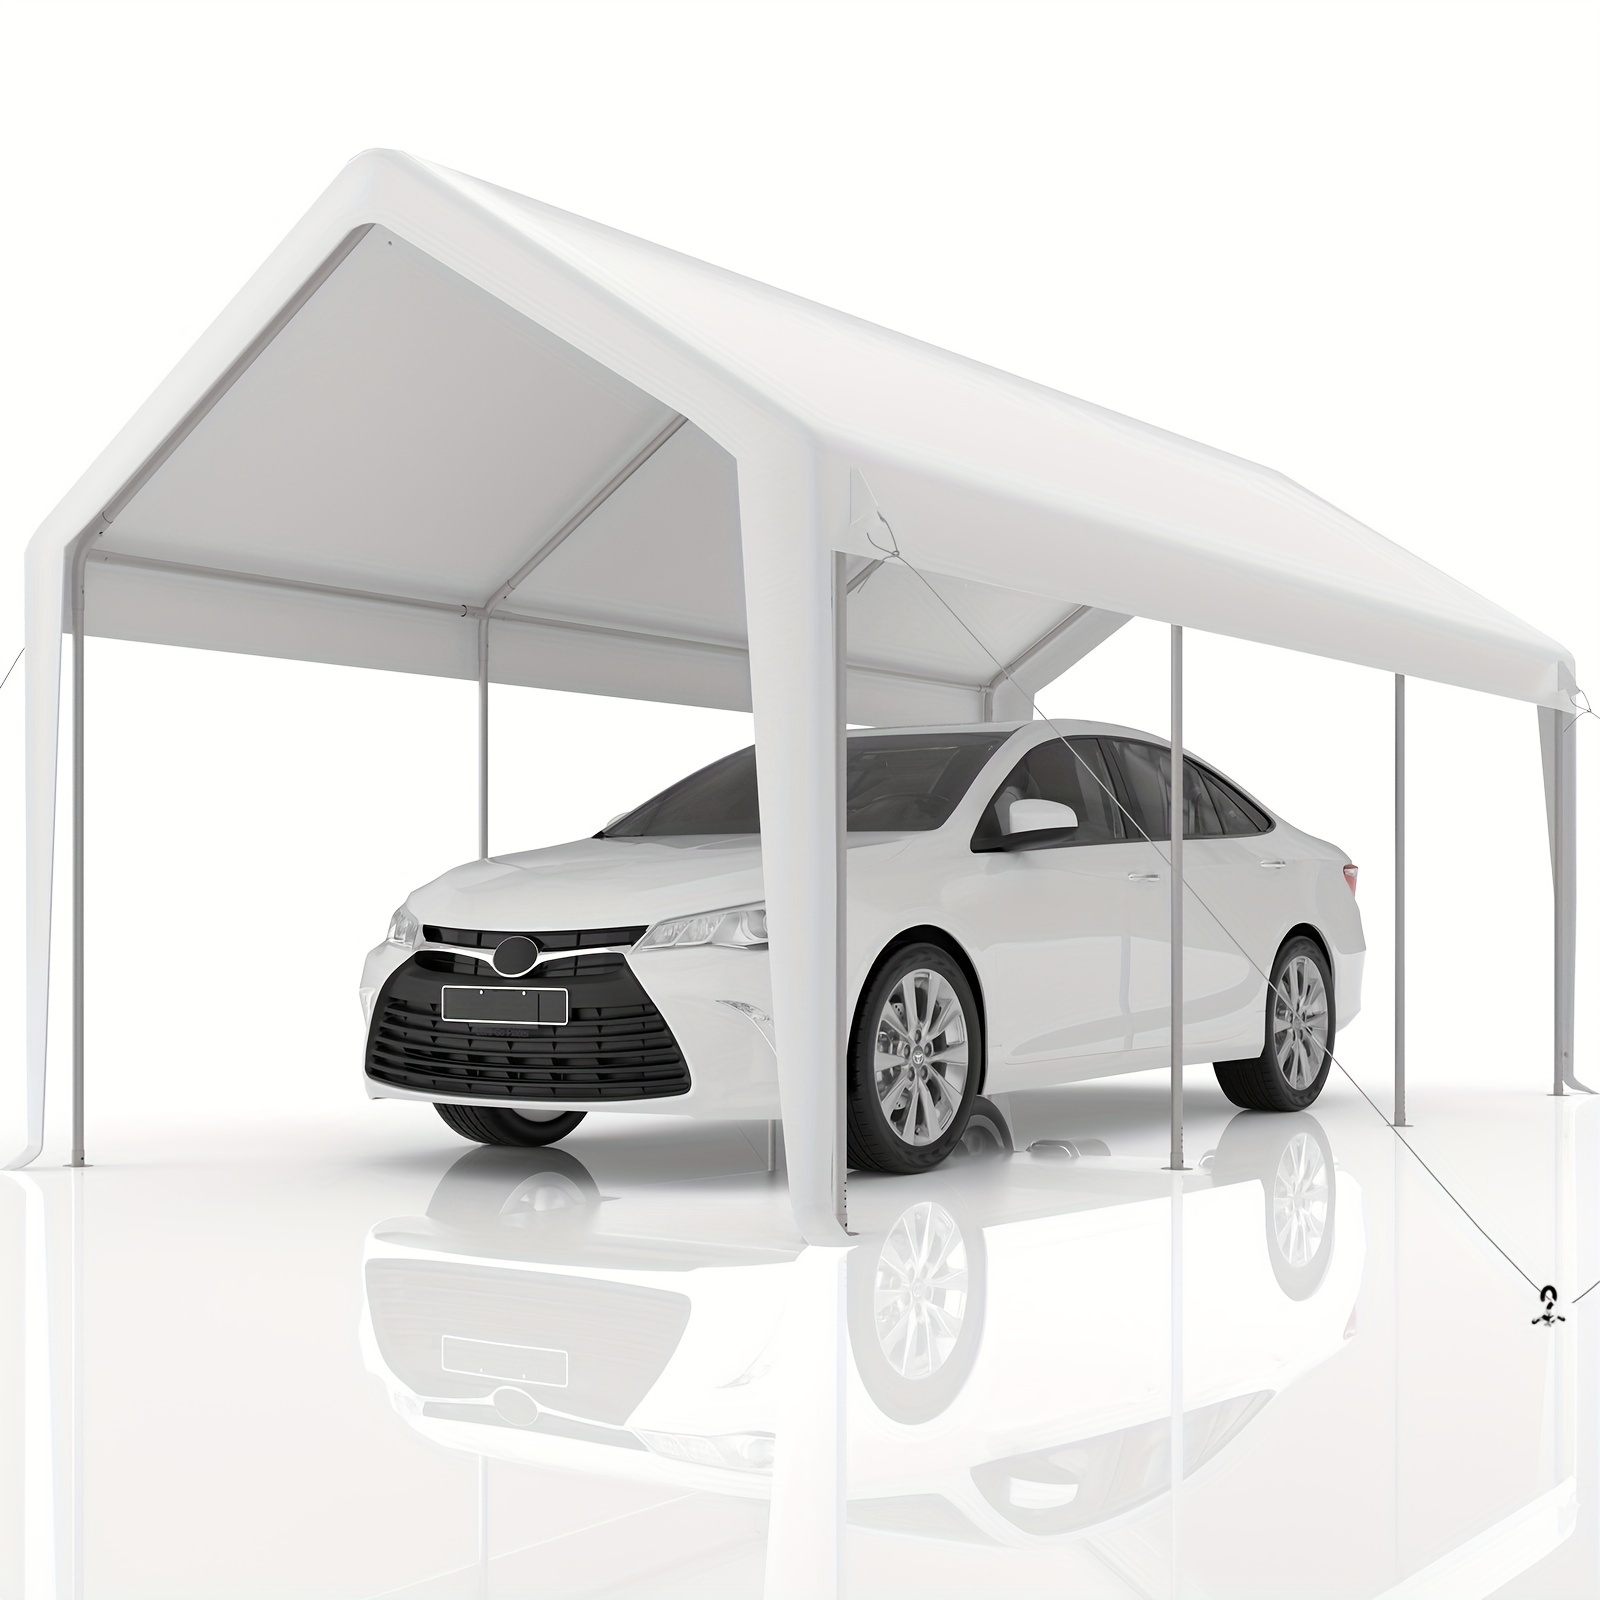 

Dexso 13'x20' Heavy Duty Carport Canopy, Portable Garage With Reinforced Frame, For Full-size Pickup, Bass Boat, And Equipment